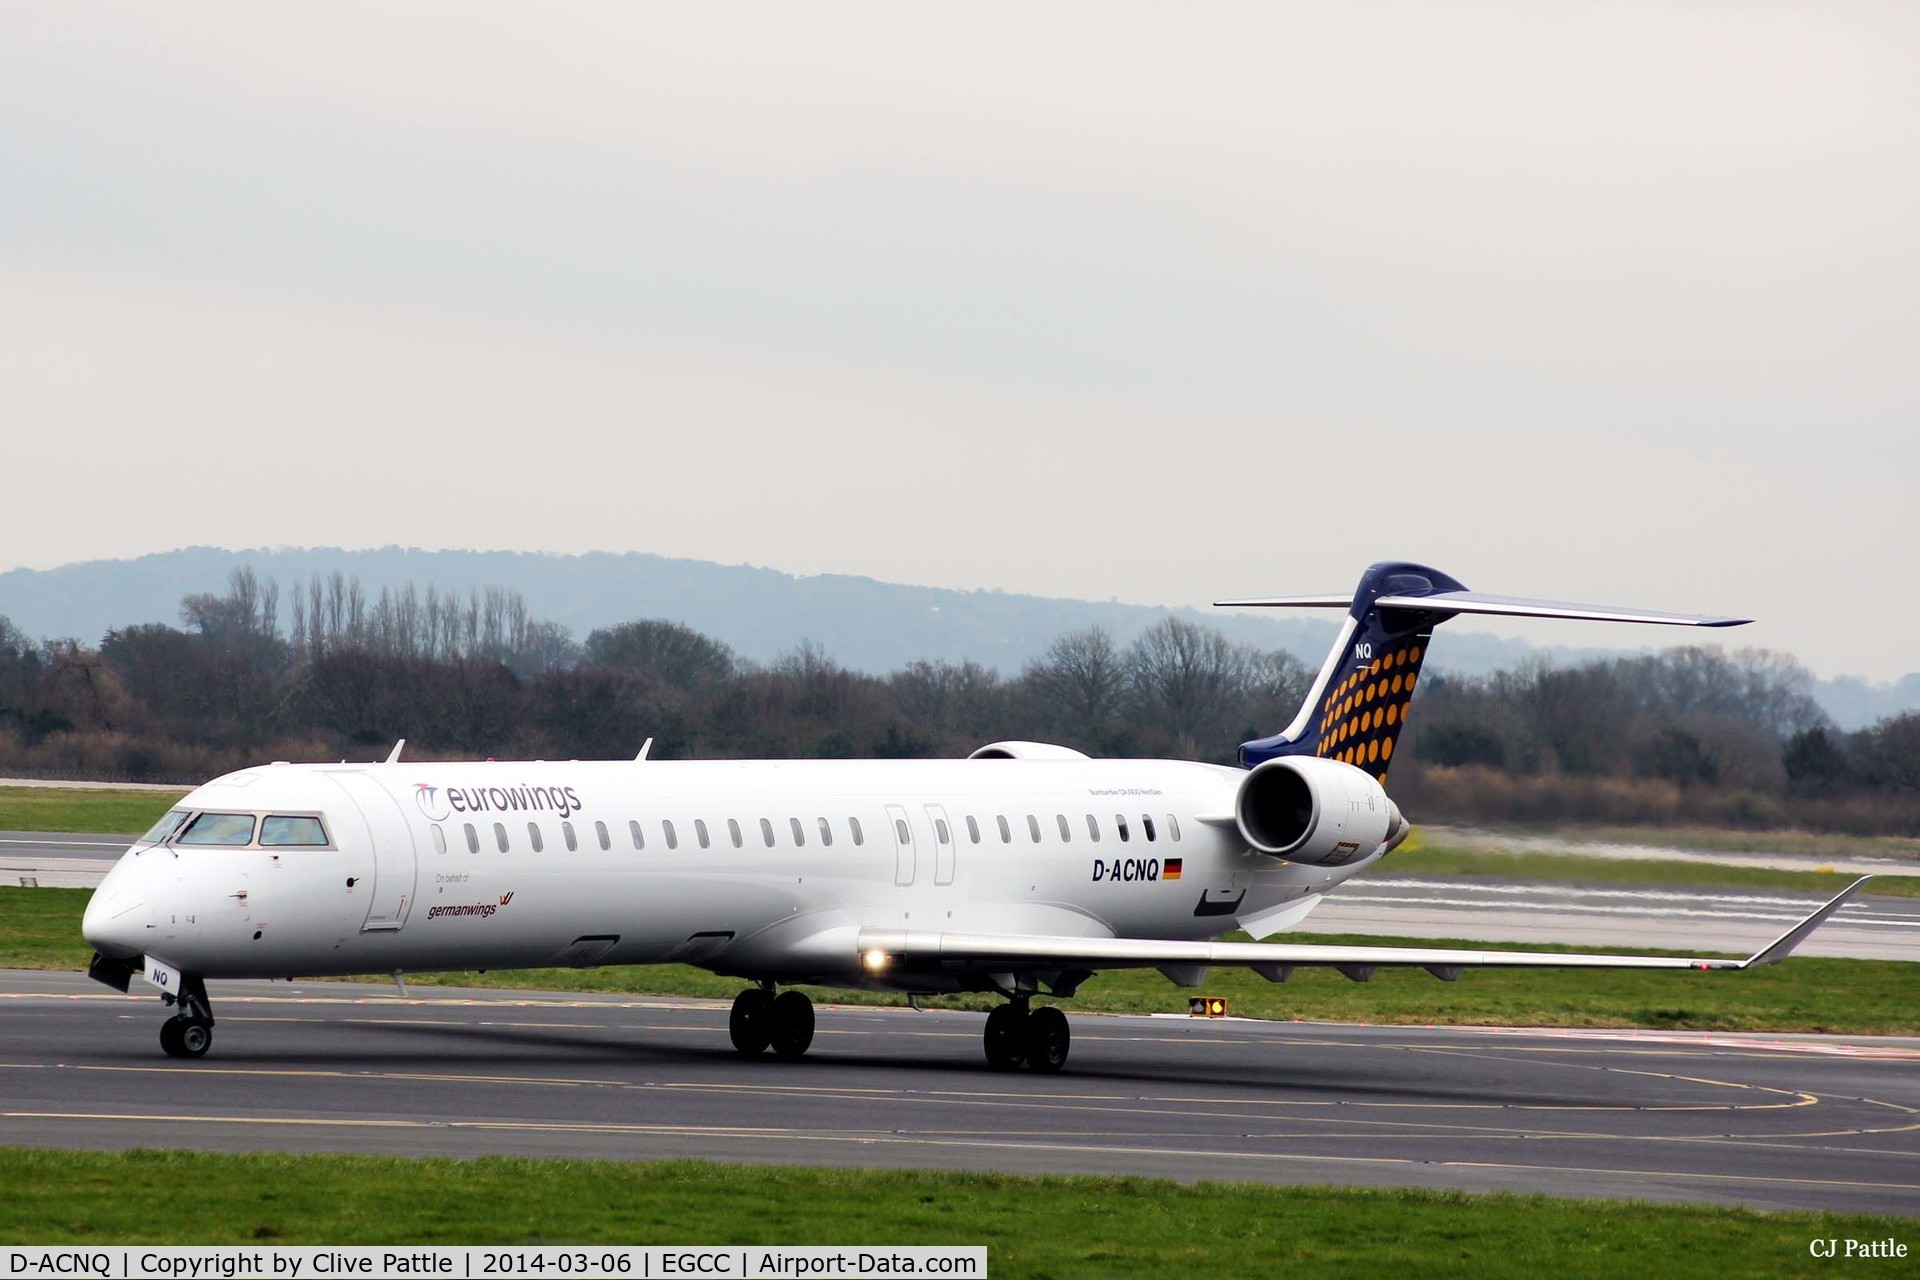 D-ACNQ, 2010 Bombardier CRJ-900LR (CL-600-2D24) C/N 15260, Manchester arrival - taxy to the gate